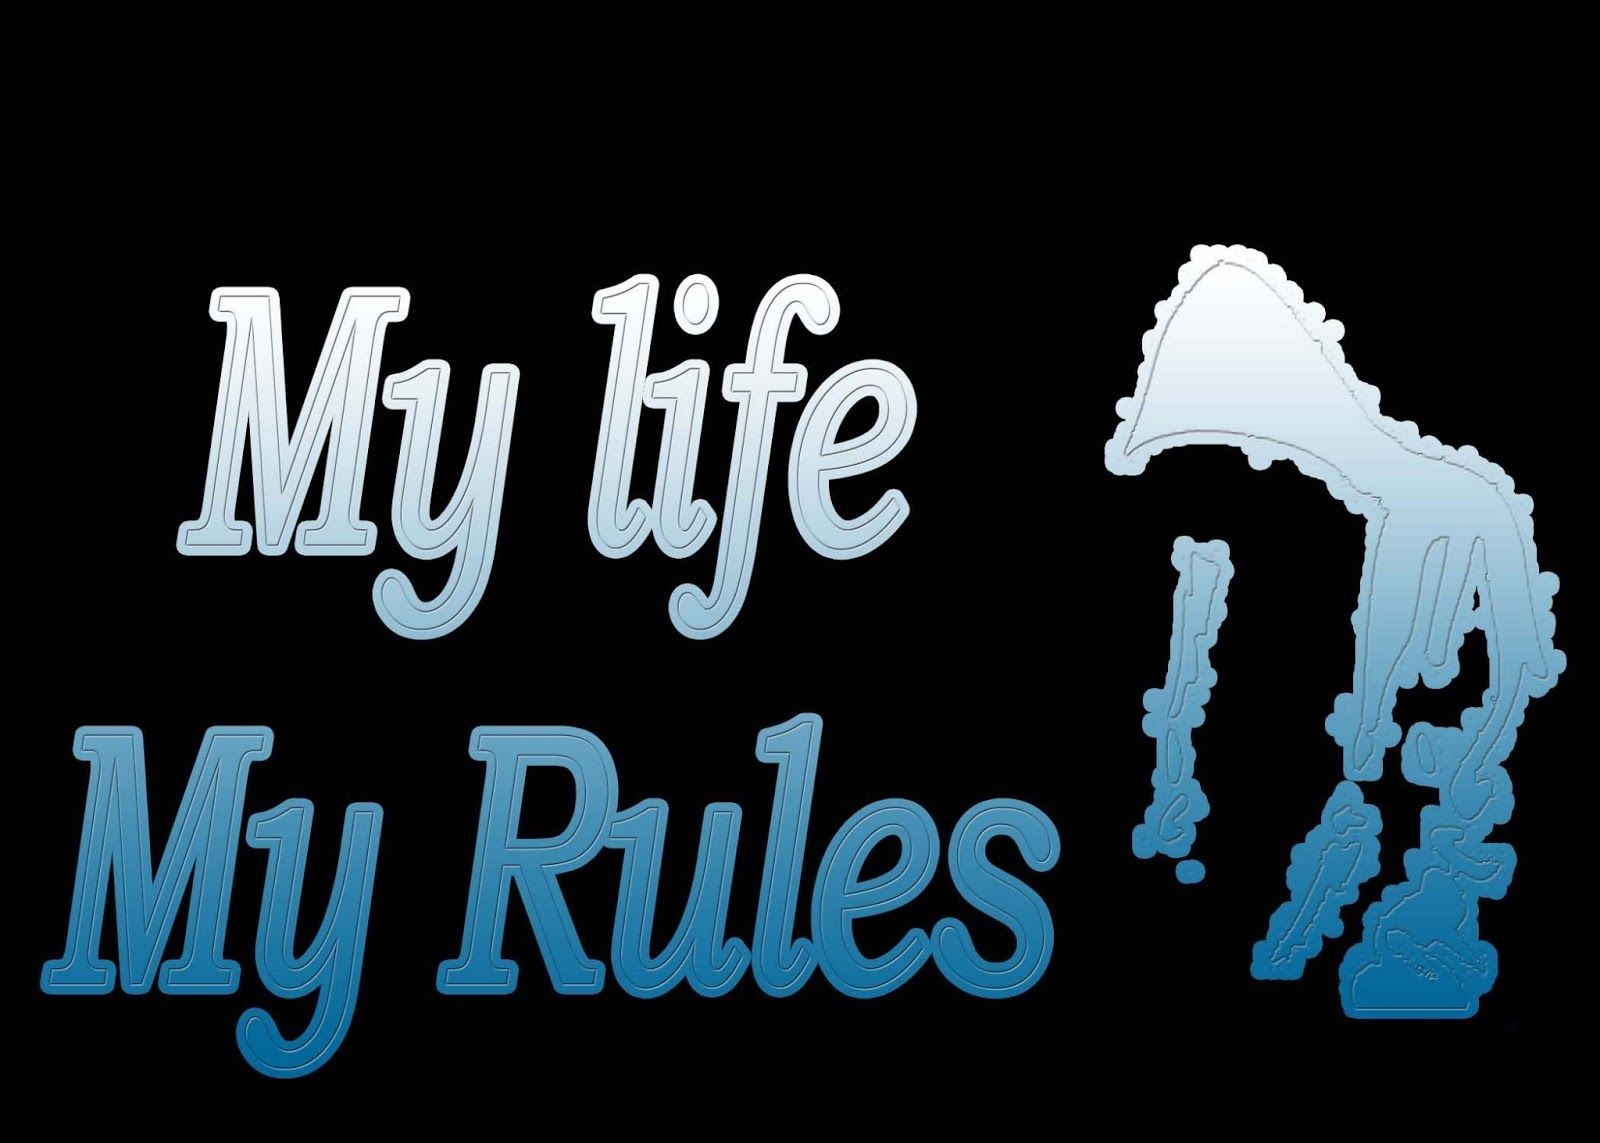 My life be like ares. My Life my Rules. My Life my Rules обои. My Life my Rules картинки. My Life my Rules надпись.